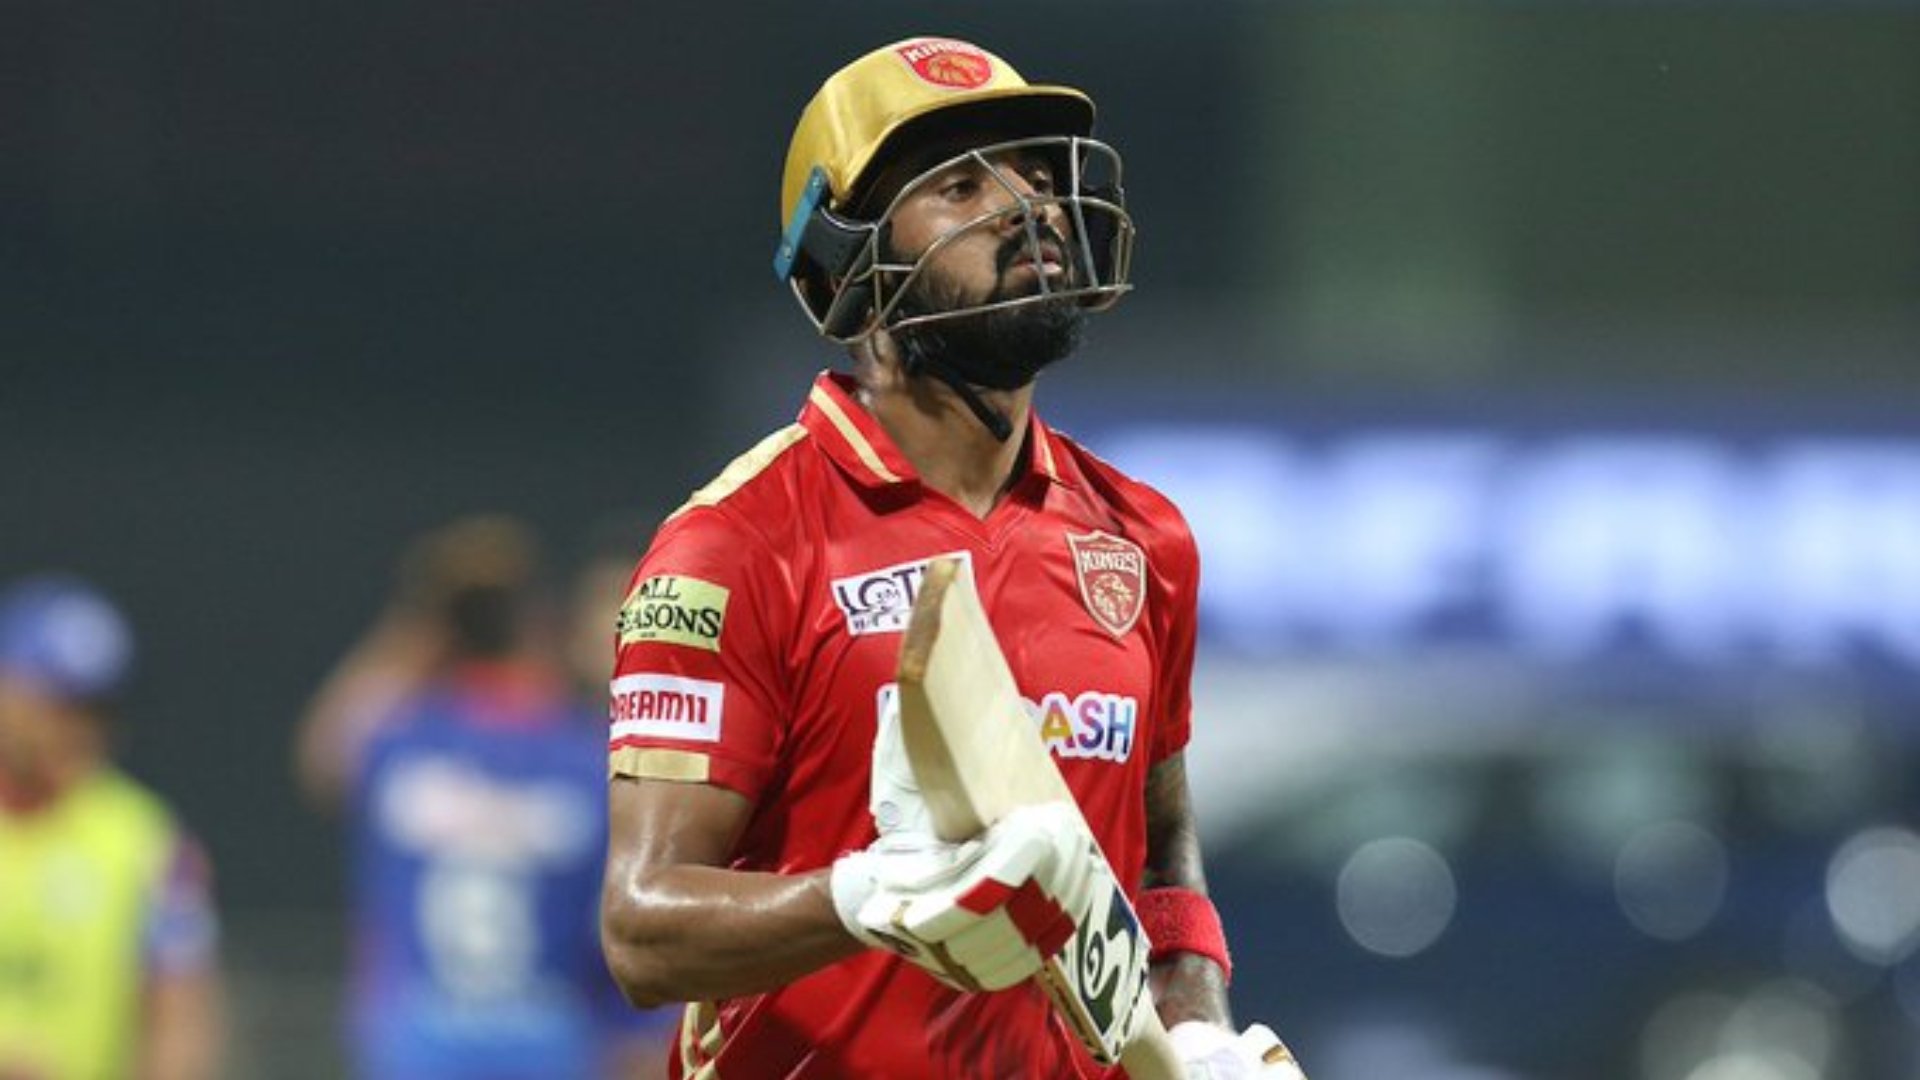 KL Rahul in a file photo. (Image credit: Twitter)